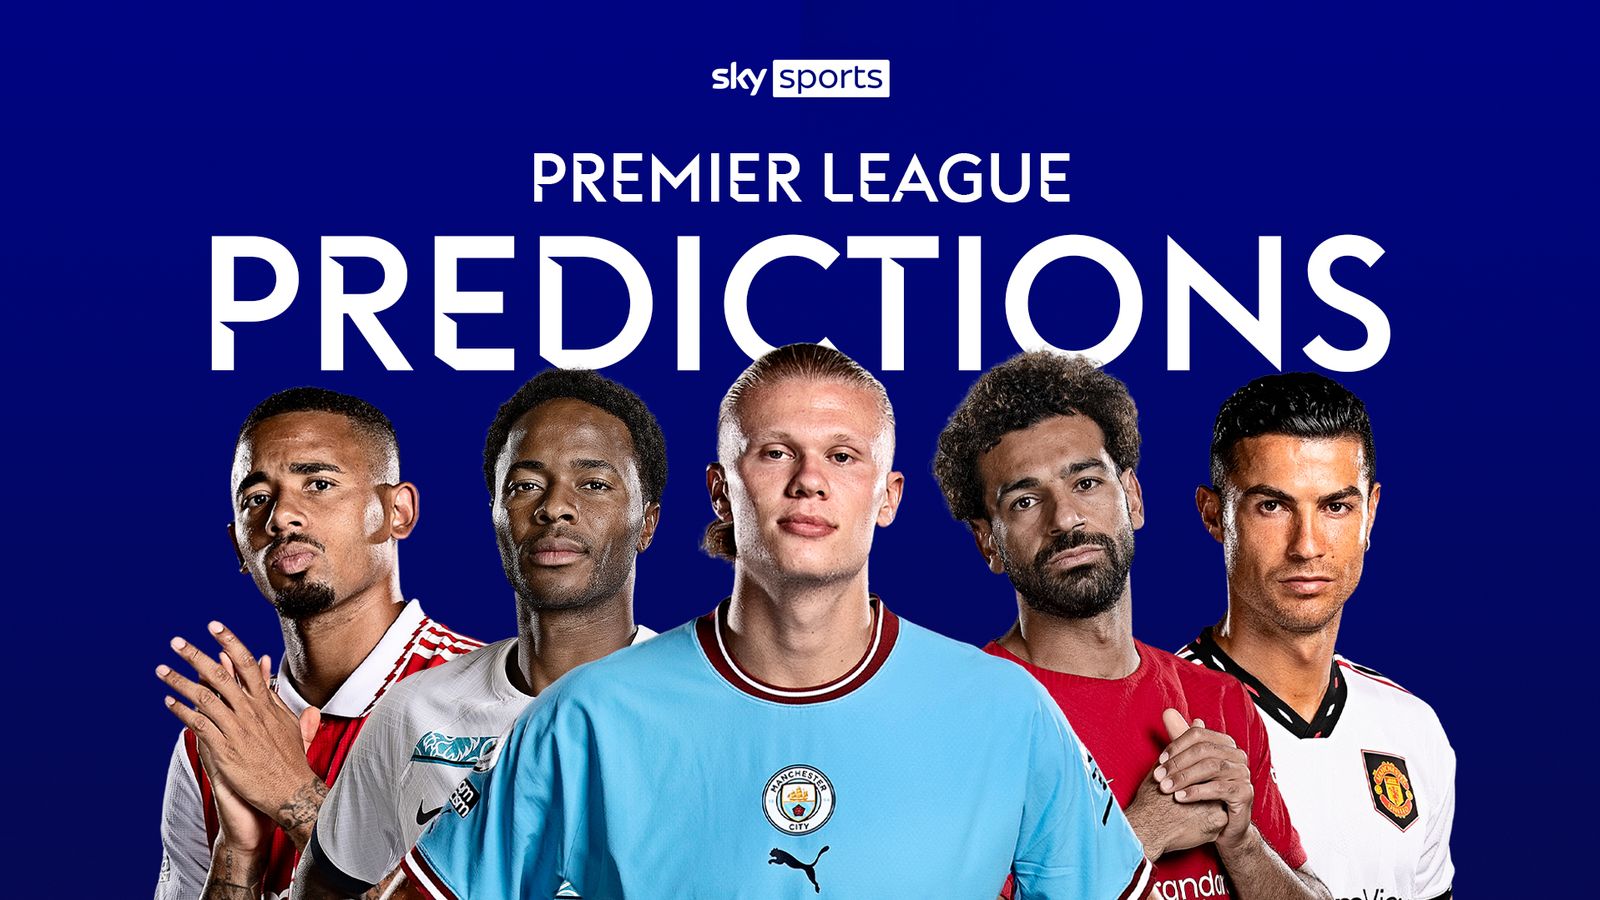 premier-league-predictions-jones-knows-can-t-separate-arsenal-and-tottenham-but-wants-to-back-cards